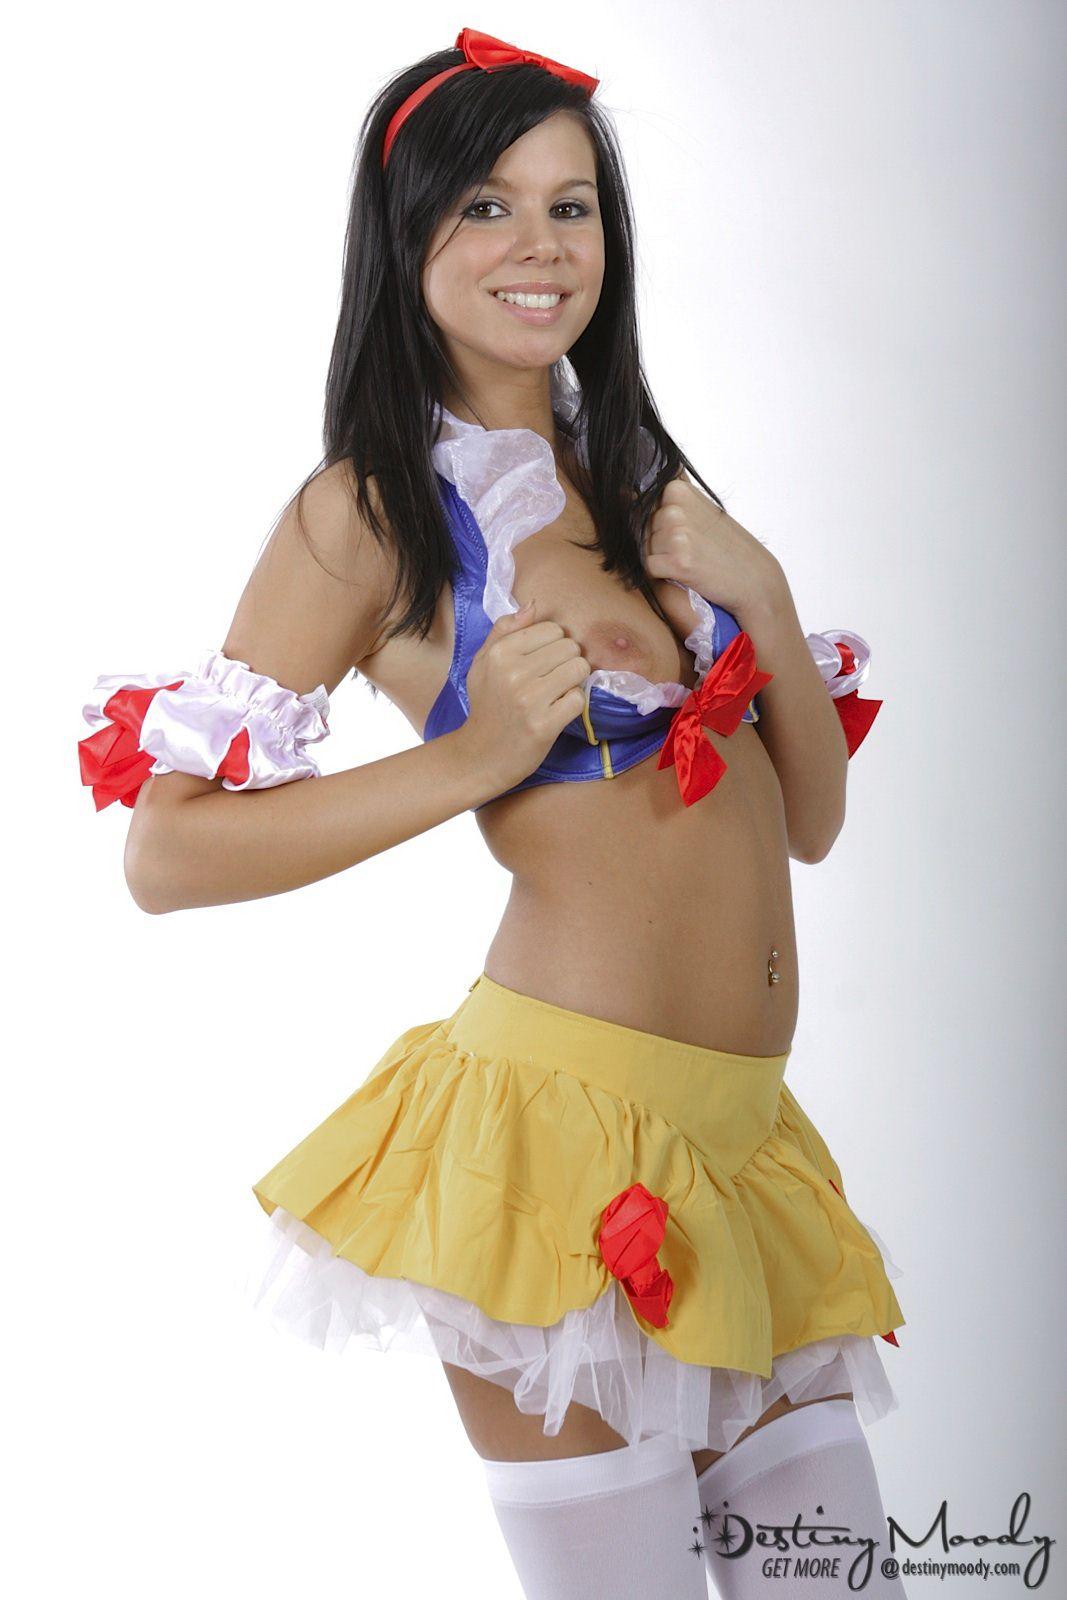 Destiny Moody will be your sexy fantasy snow white for the night #60341131